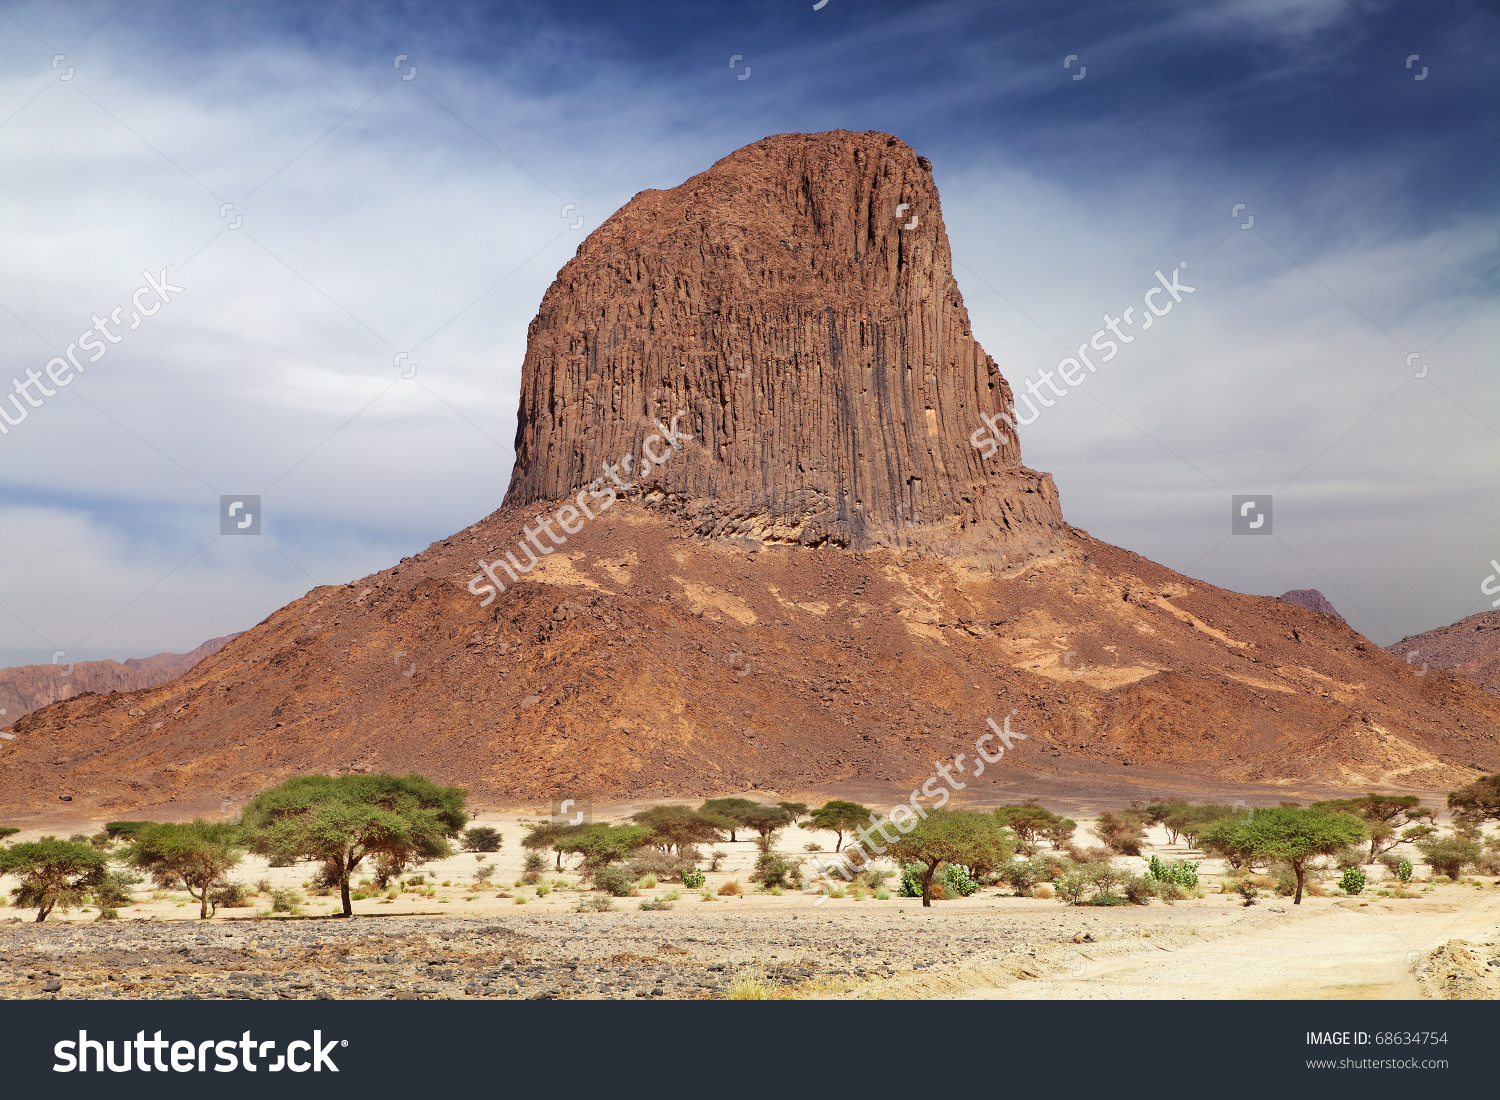 Hoggar Mountains clipart #20, Download drawings